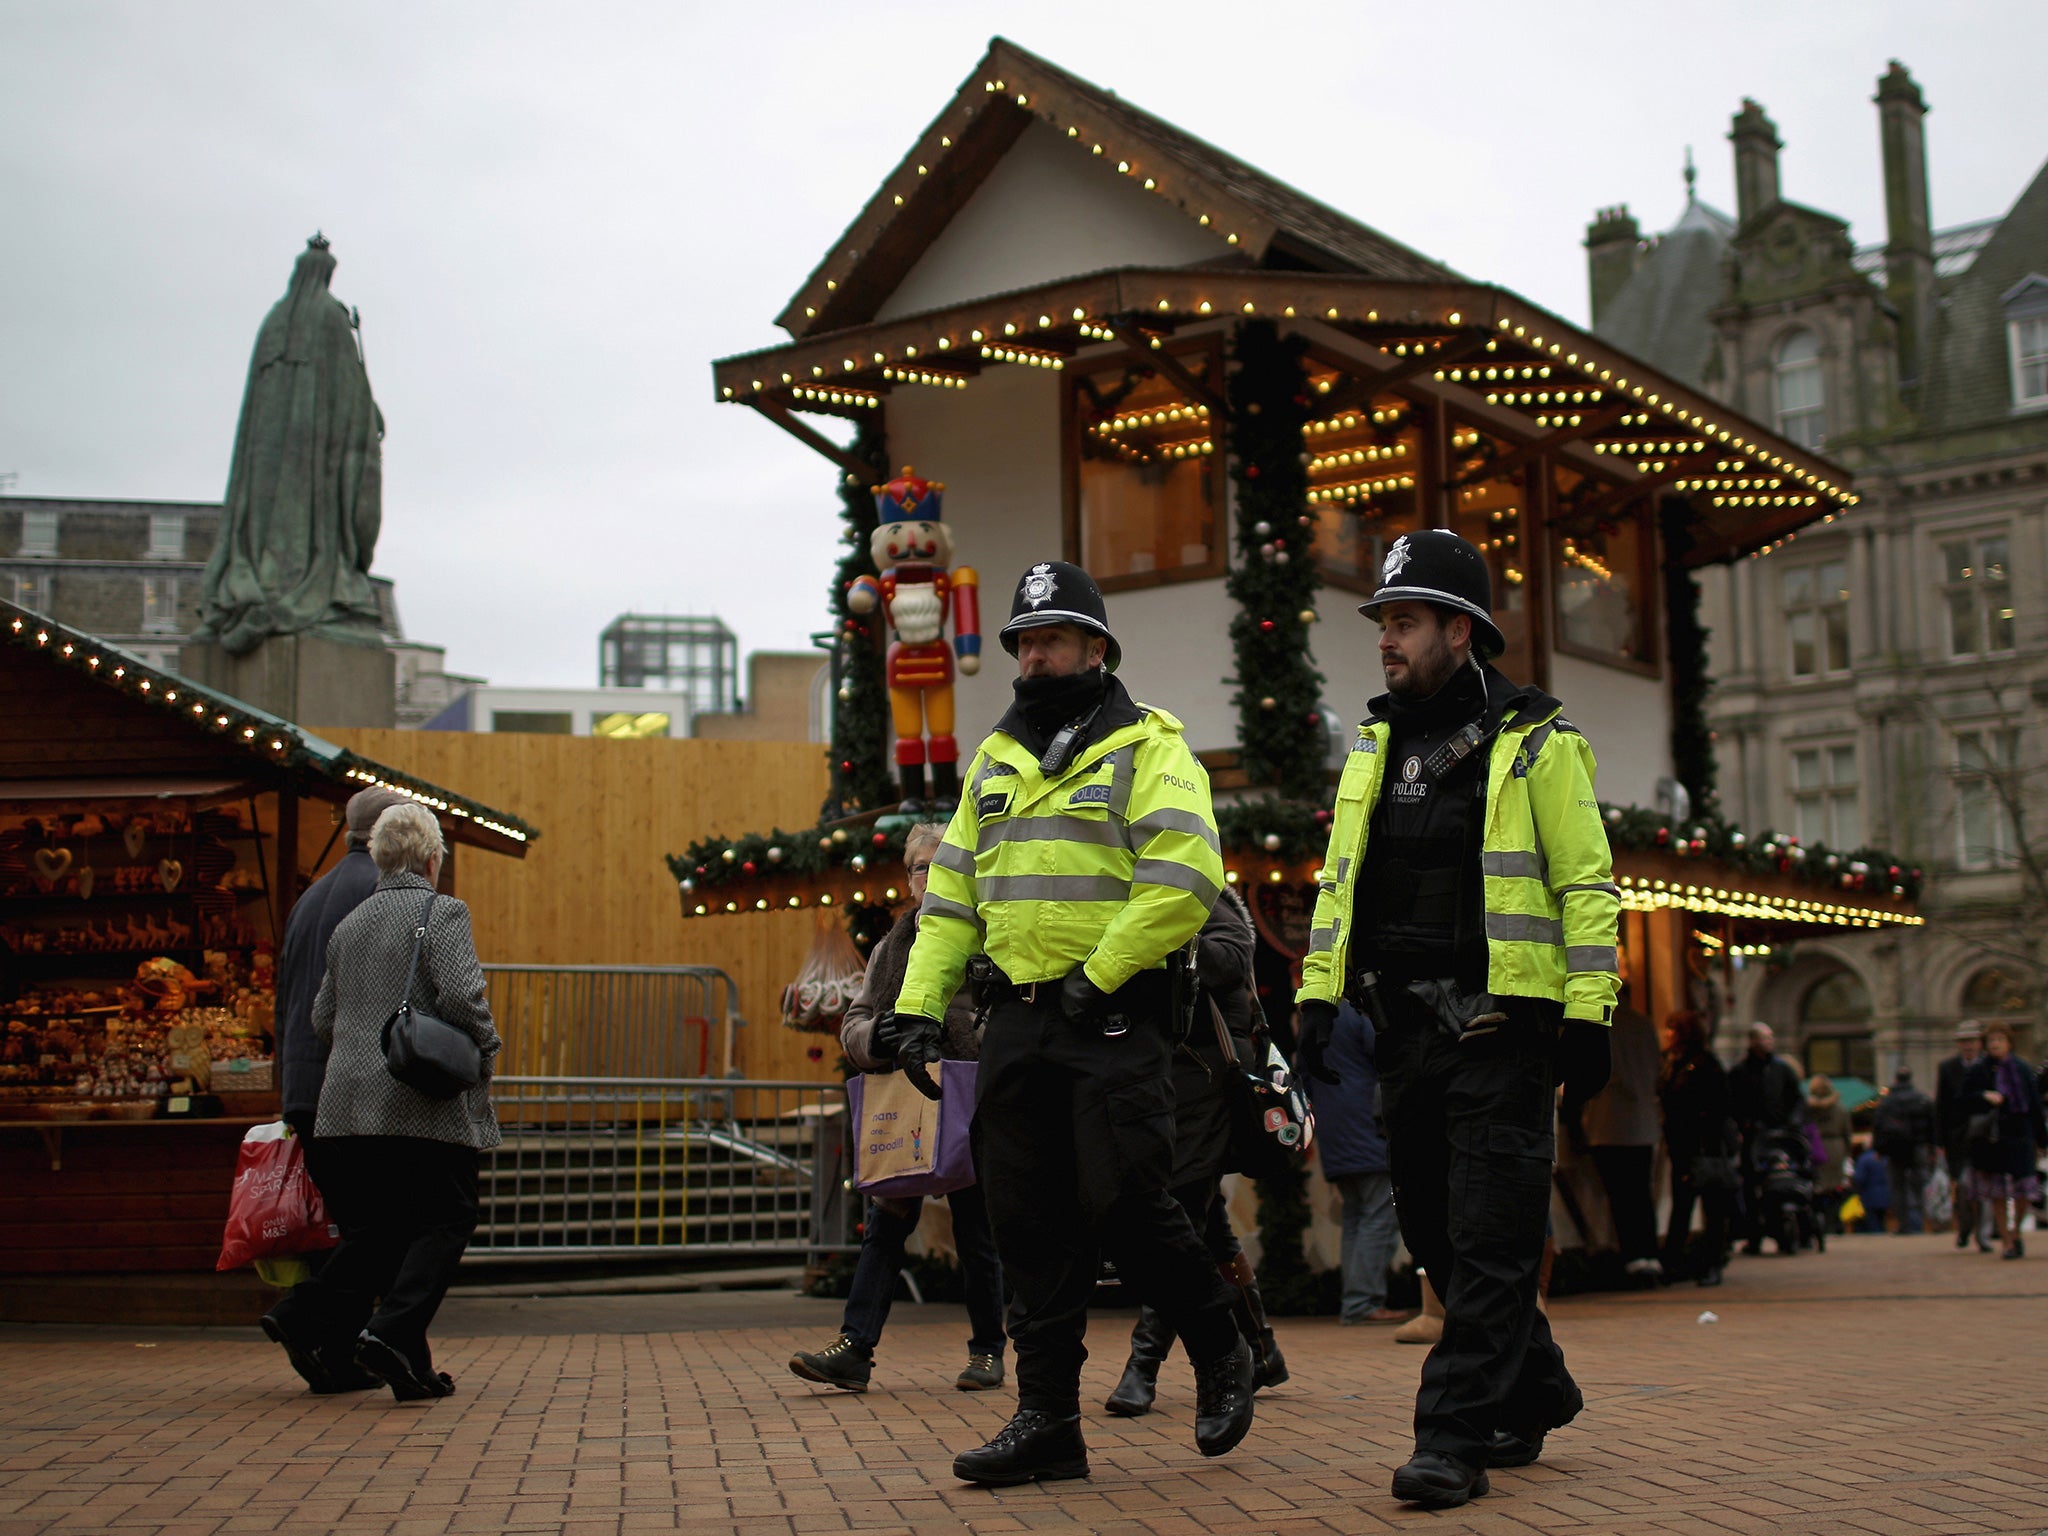 Officers from West Midlands police force patrol the streets of Birmingham during a security threat on December 9, 2014 in Birmingham, England. Officers of West Midlands Police continued their patrols as an alleged threat to kidnap and kill an officer was